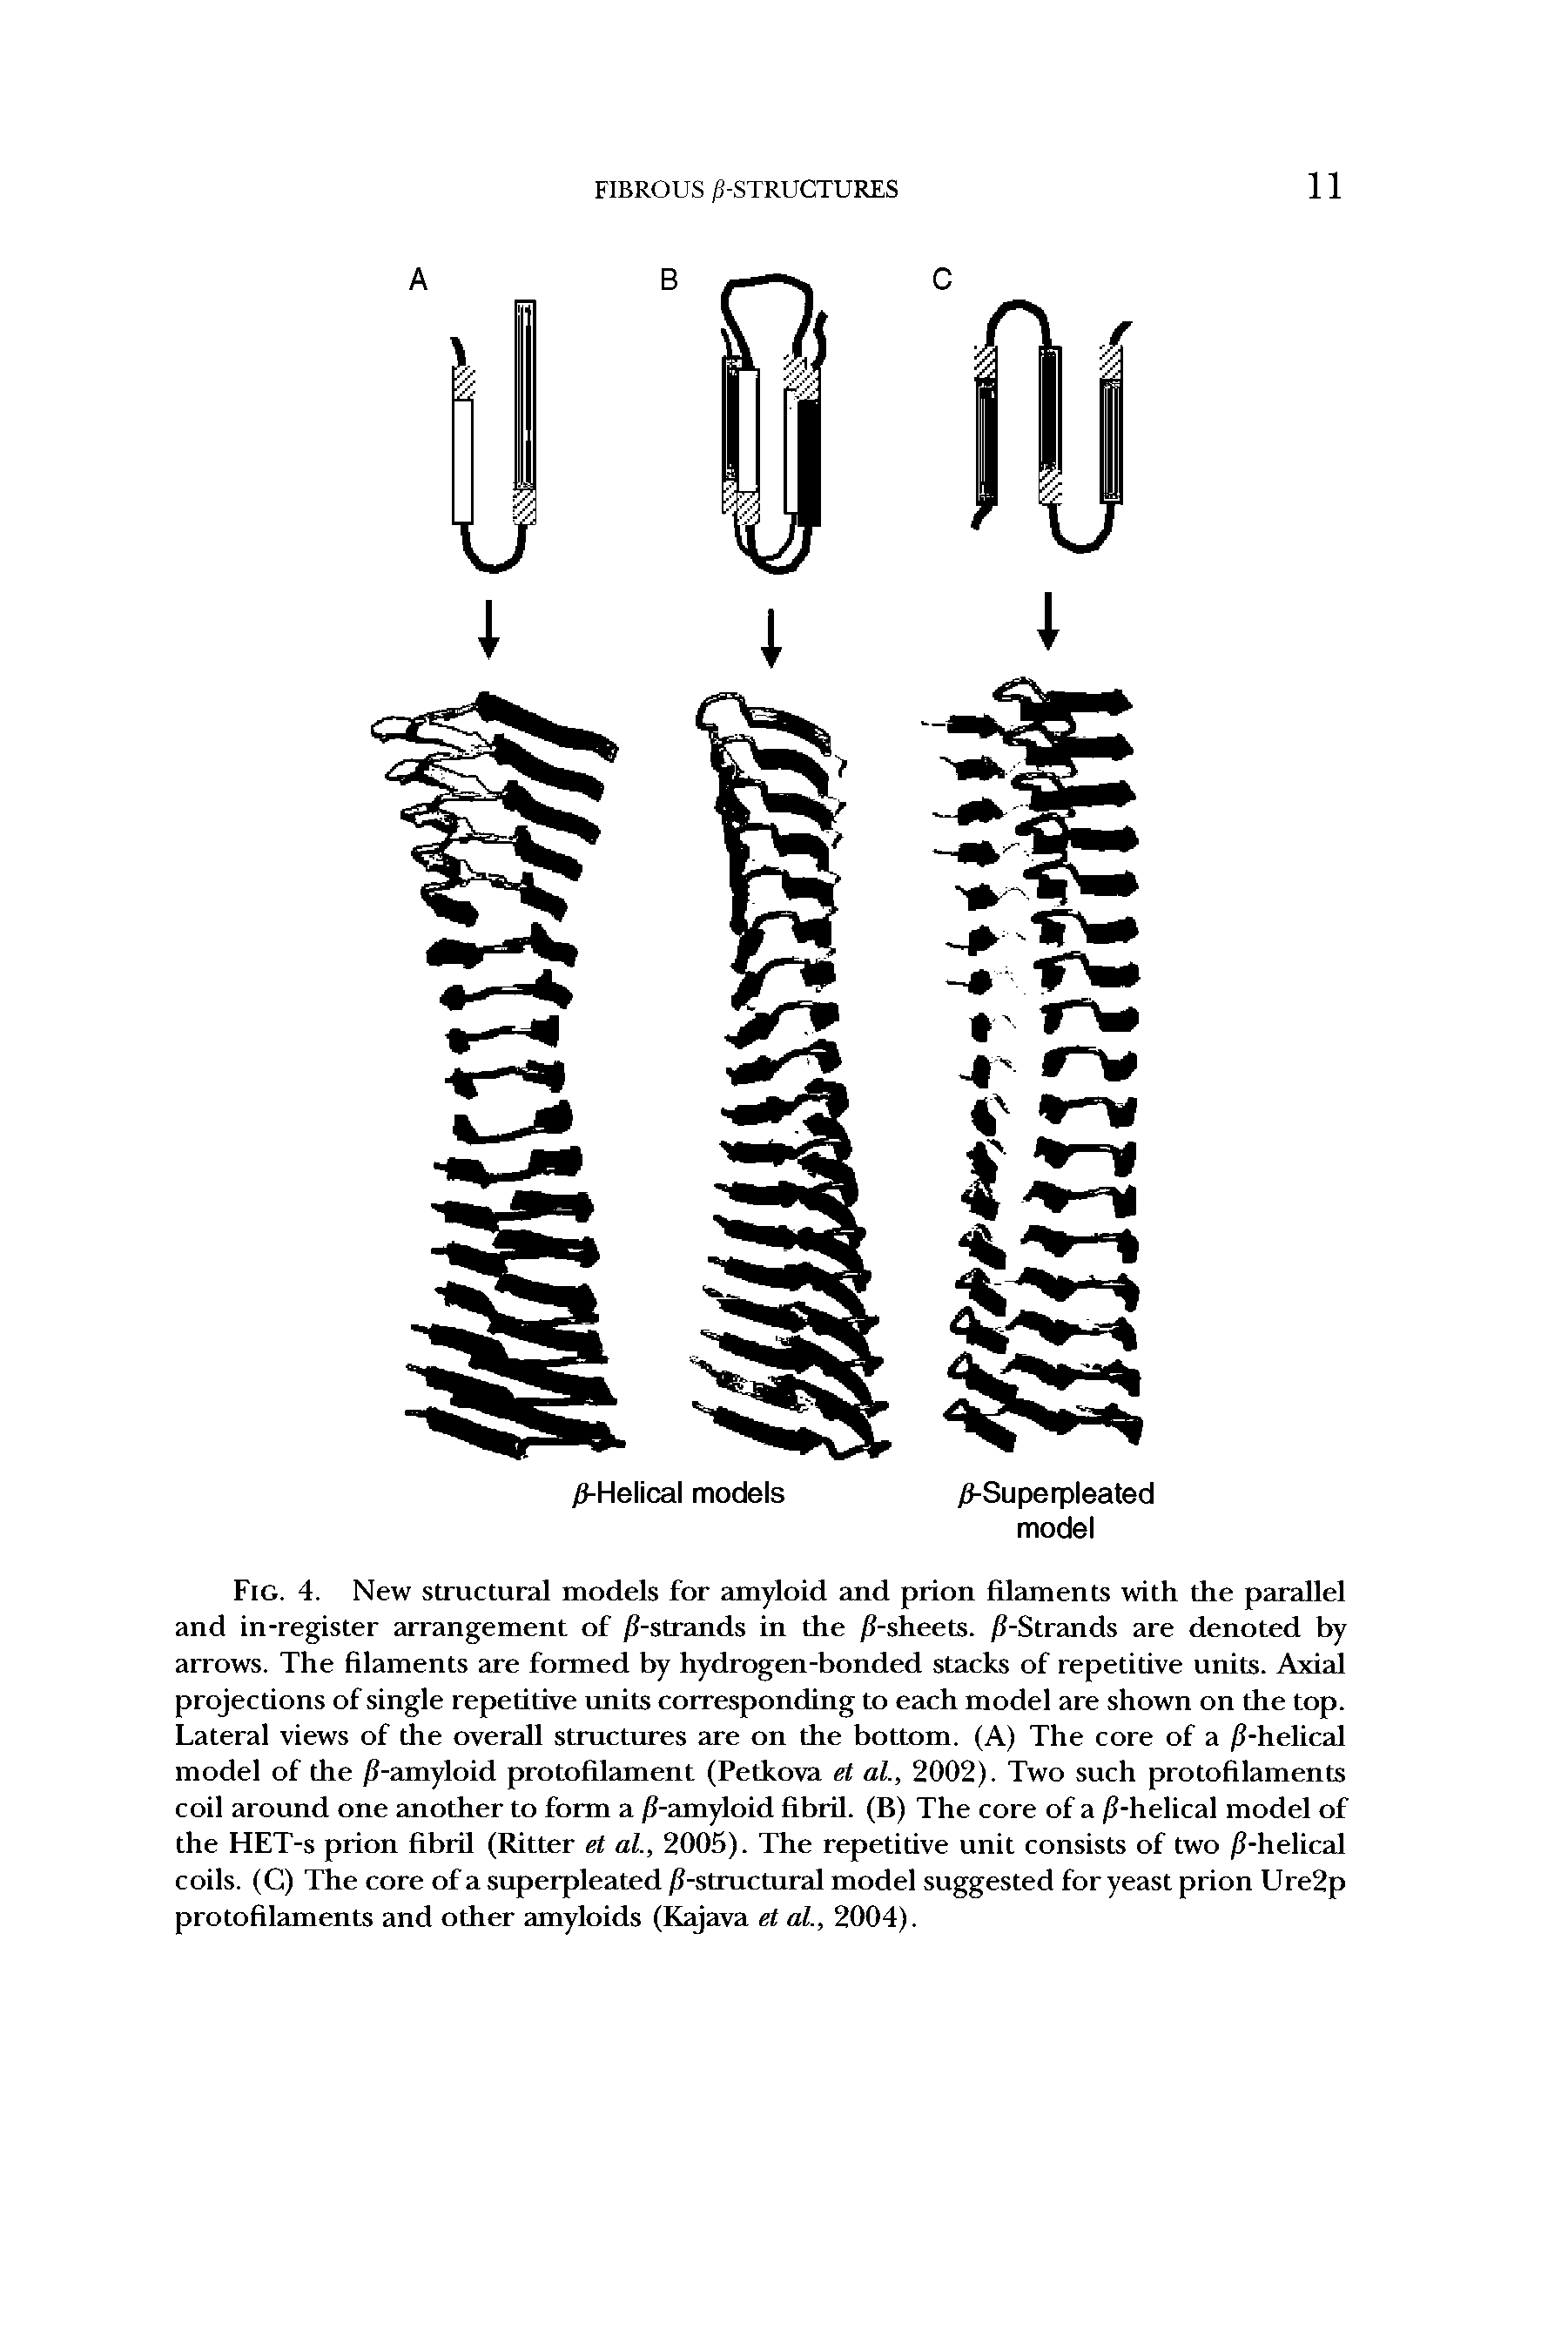 Fig. 4. New structural models for amyloid and prion filaments with the parallel and in-register arrangement of //-strands in the //-sheets. //-Strands are denoted by arrows. The filaments are formed by hydrogen-bonded stacks of repetitive units. Axial projections of single repetitive units corresponding to each model are shown on the top. Lateral views of the overall structures are on the bottom. (A) The core of a //-helical model of the //-amyloid protofilament (Petkova et al., 2002). Two such protofilaments coil around one another to form a //-amyloid fibril. (B) The core of a //-helical model of the HET-s prion fibril (Ritter et al., 2005). The repetitive unit consists of two //-helical coils. (C) The core of a superpleated //-structura l model suggested for yeast prion Ure2p protofilaments and other amyloids (Kajava et al., 2004).